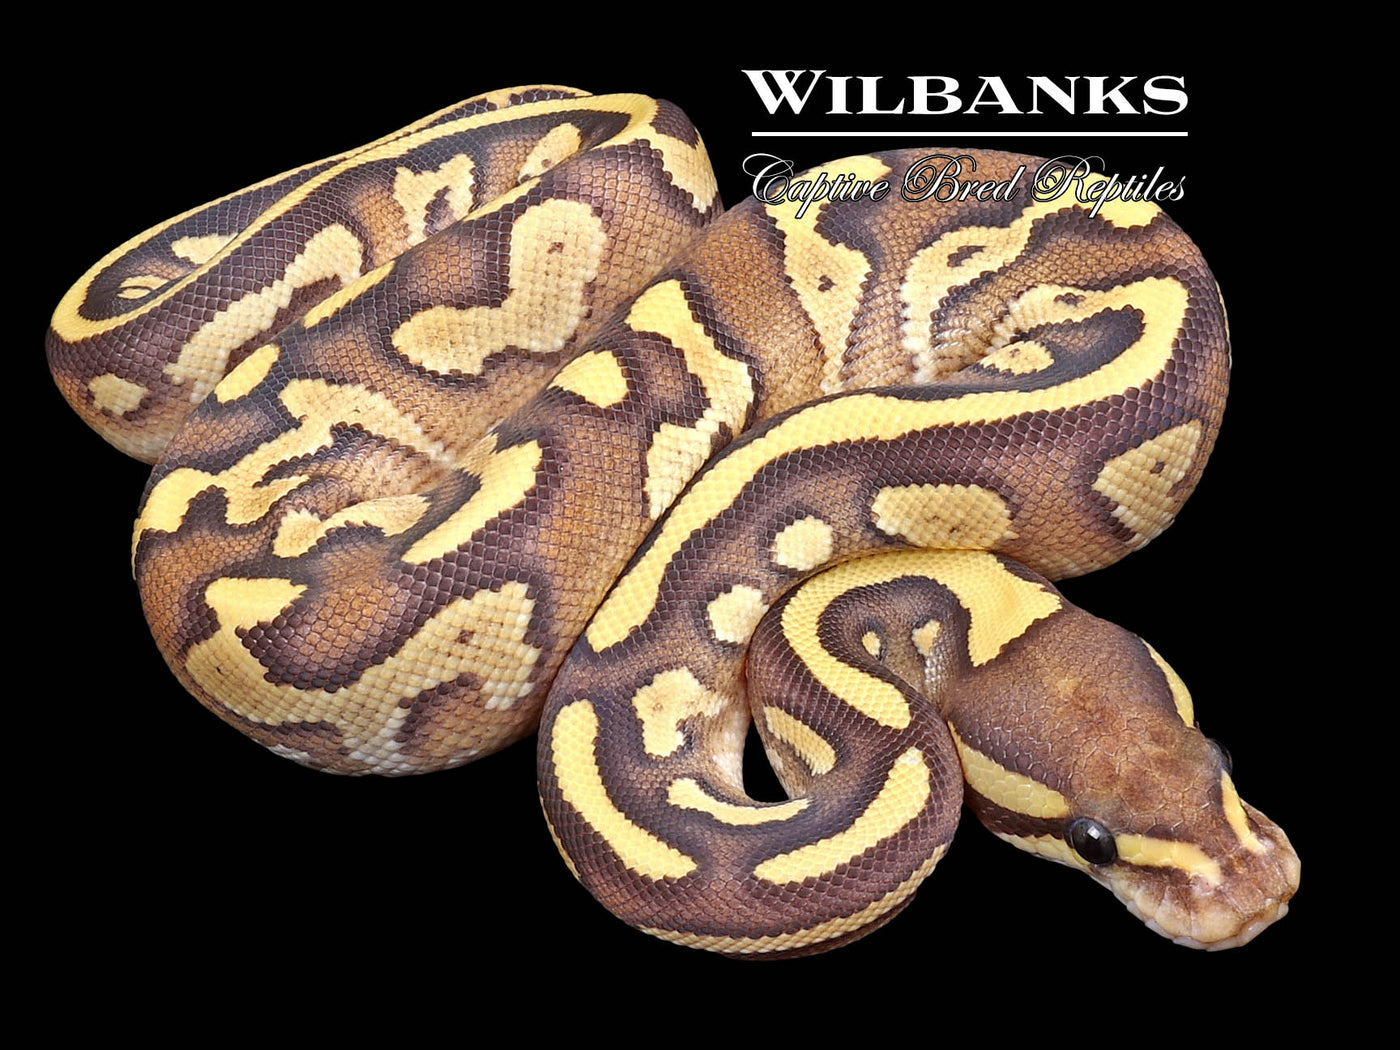 Mojave Fire Yellow Belly Ball Python ♀ '23